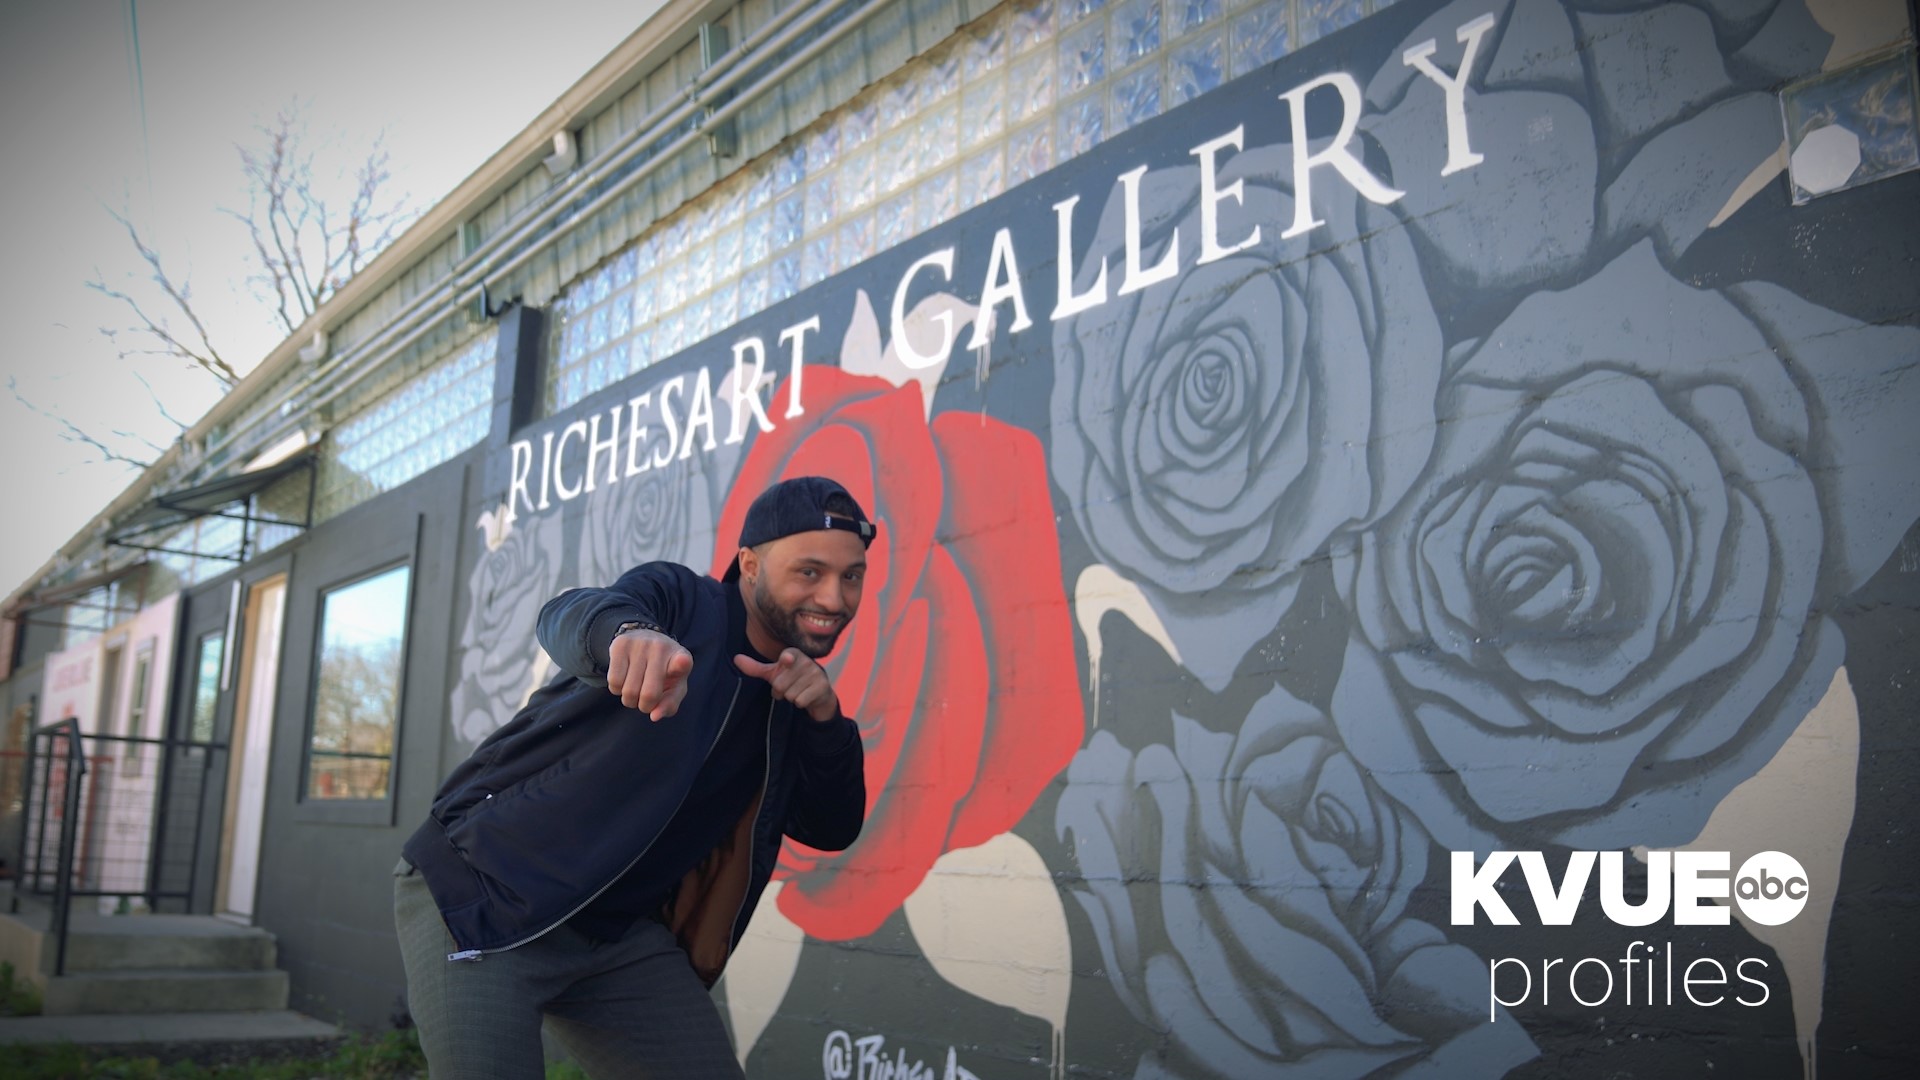 As part of KVUE's celebration of Black History Month, we met up with Richard Samuel, owner of RichesArt Gallery on East Sixth Street.